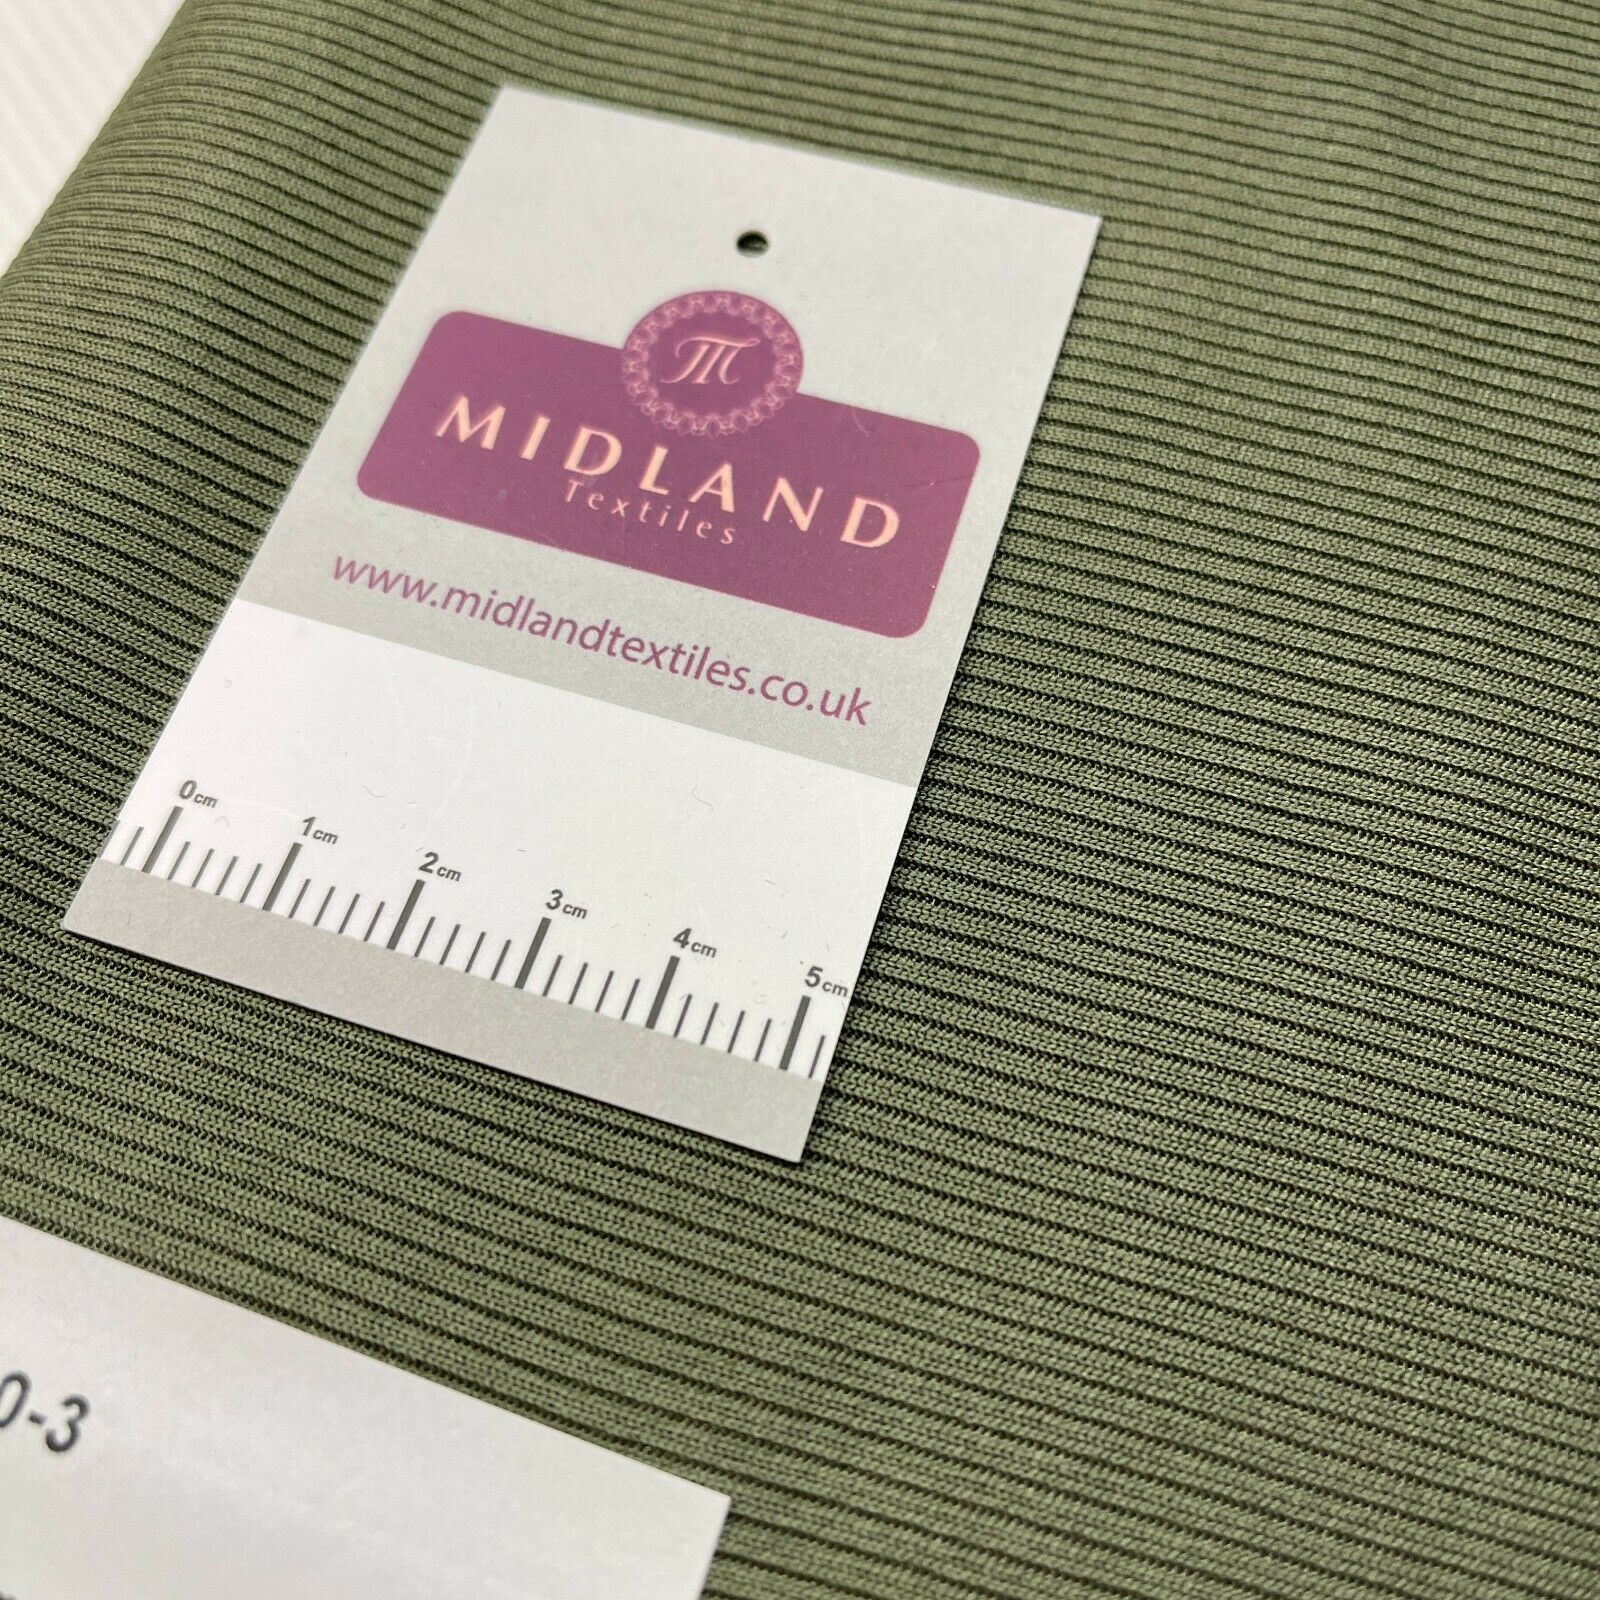 Clearance Remnant End of roll Jersey, Printed Plain Mixed Fabrics M1540